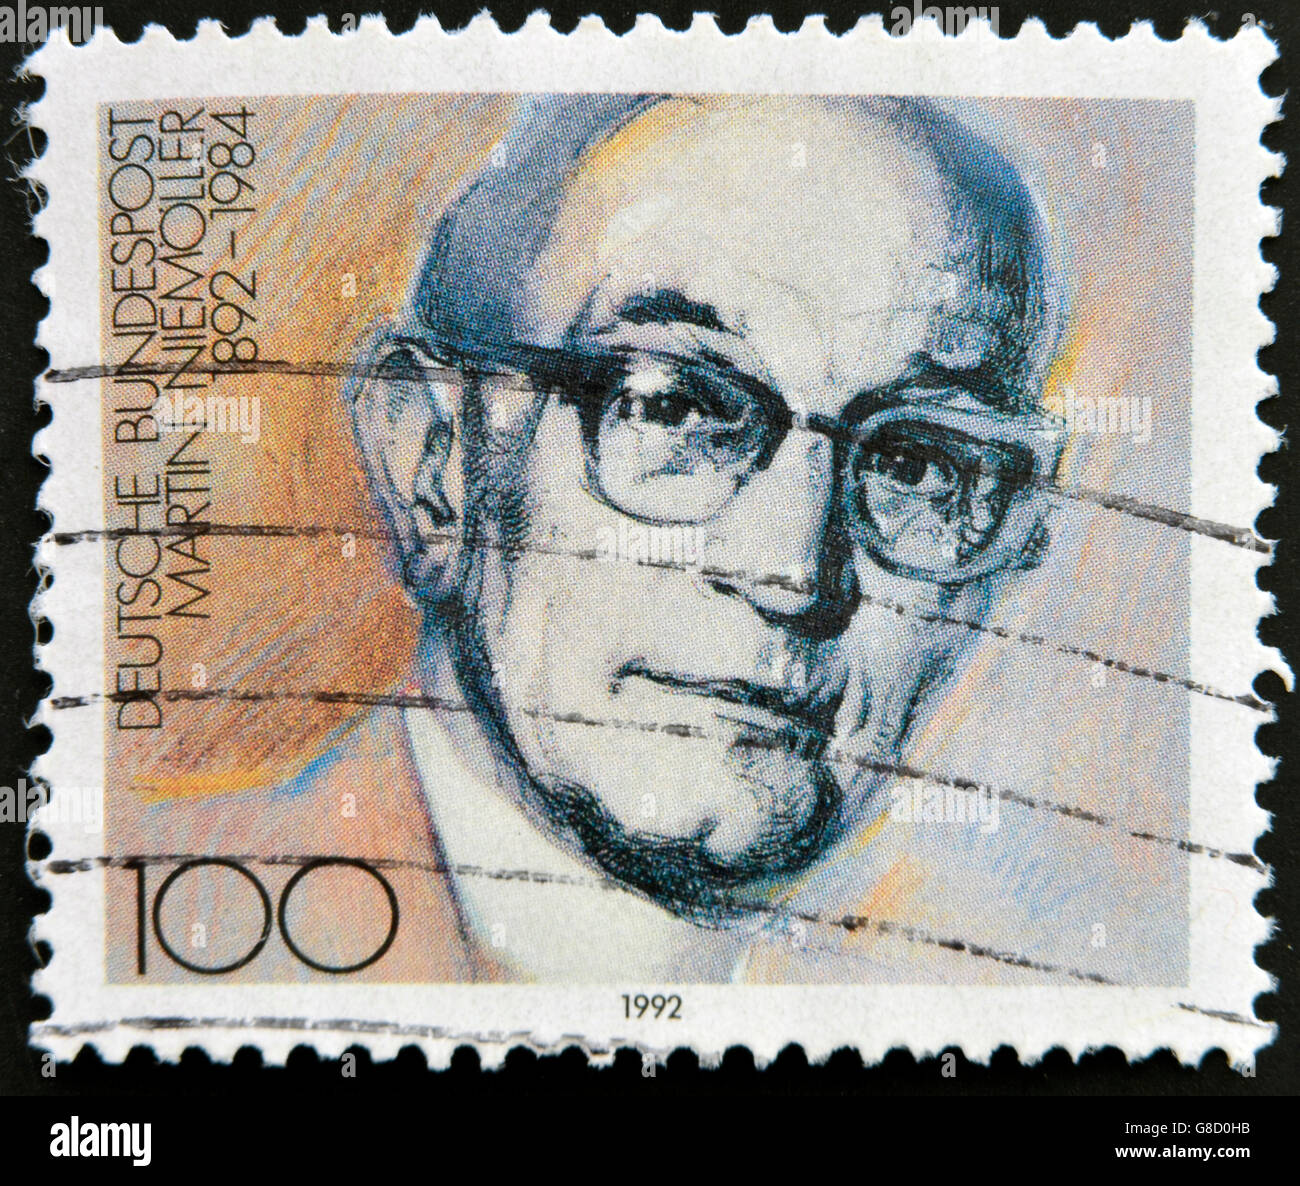 GERMANY - CIRCA 1992: stamp printed in Germany shows Martin Niemoller, Theologian, circa 1992. Stock Photo